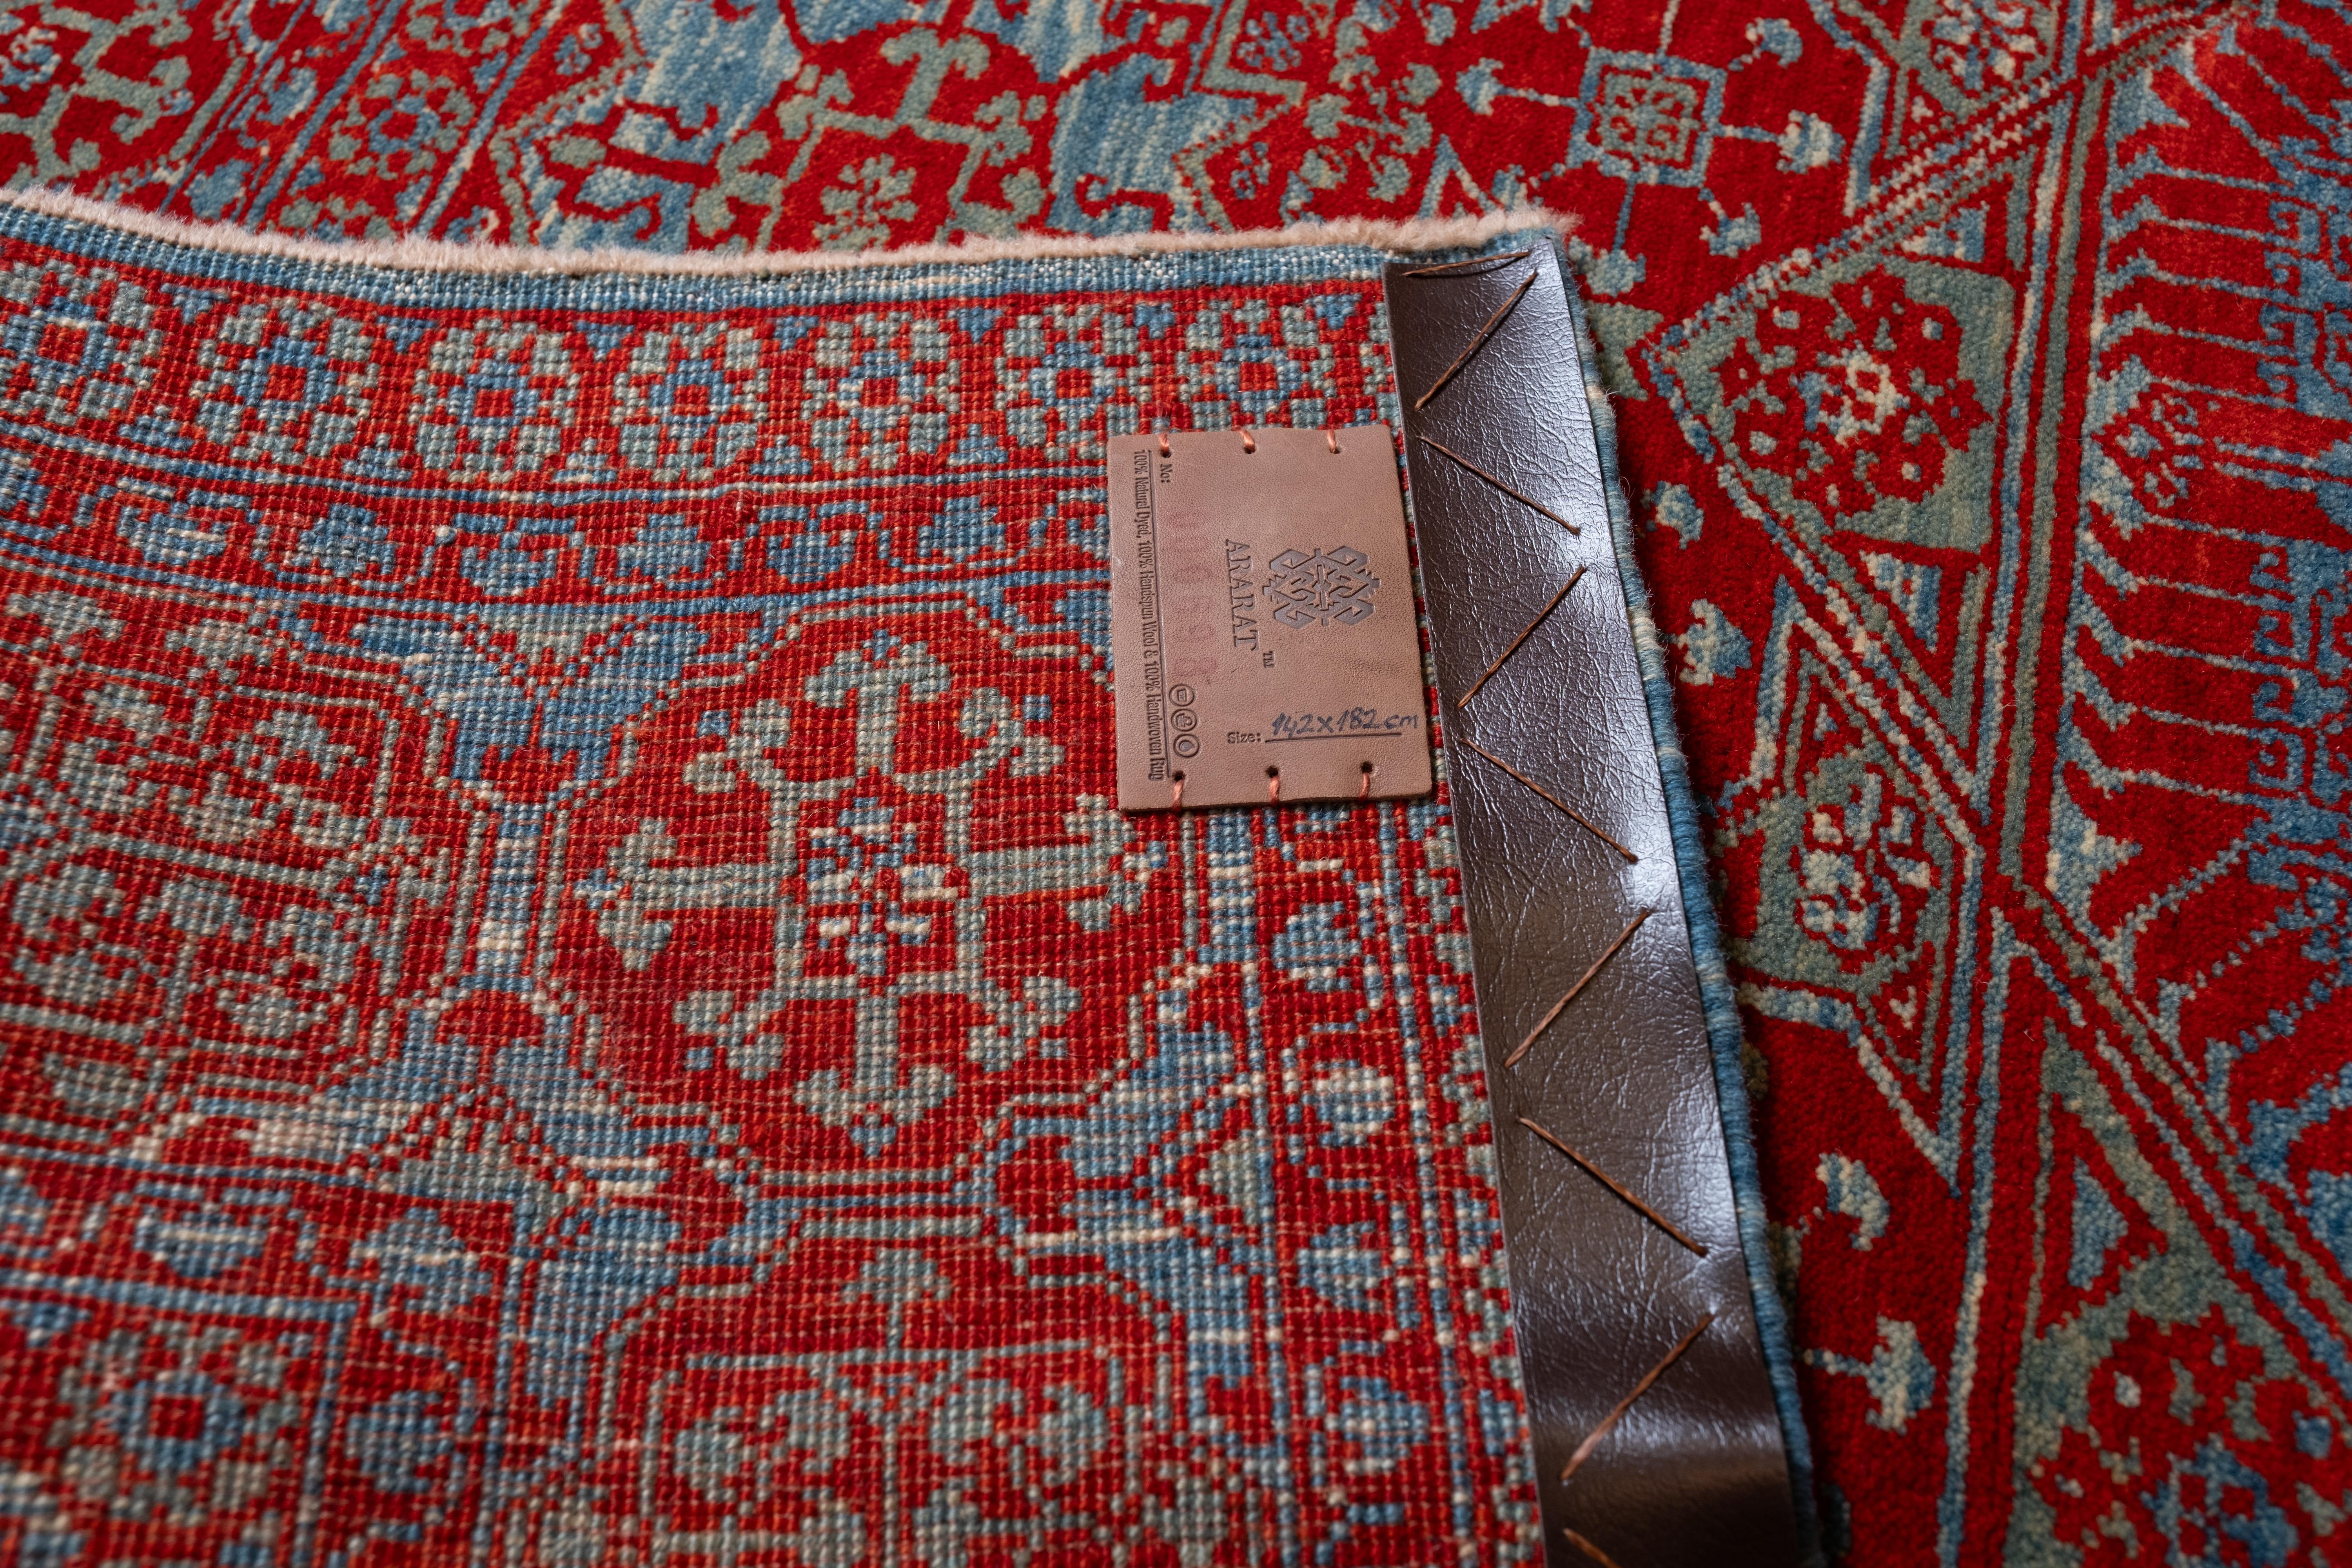 Turkish Ararat Rugs Mamluk Rug with Central Star 16th Cent. Revival Carpet Natural Dyed For Sale